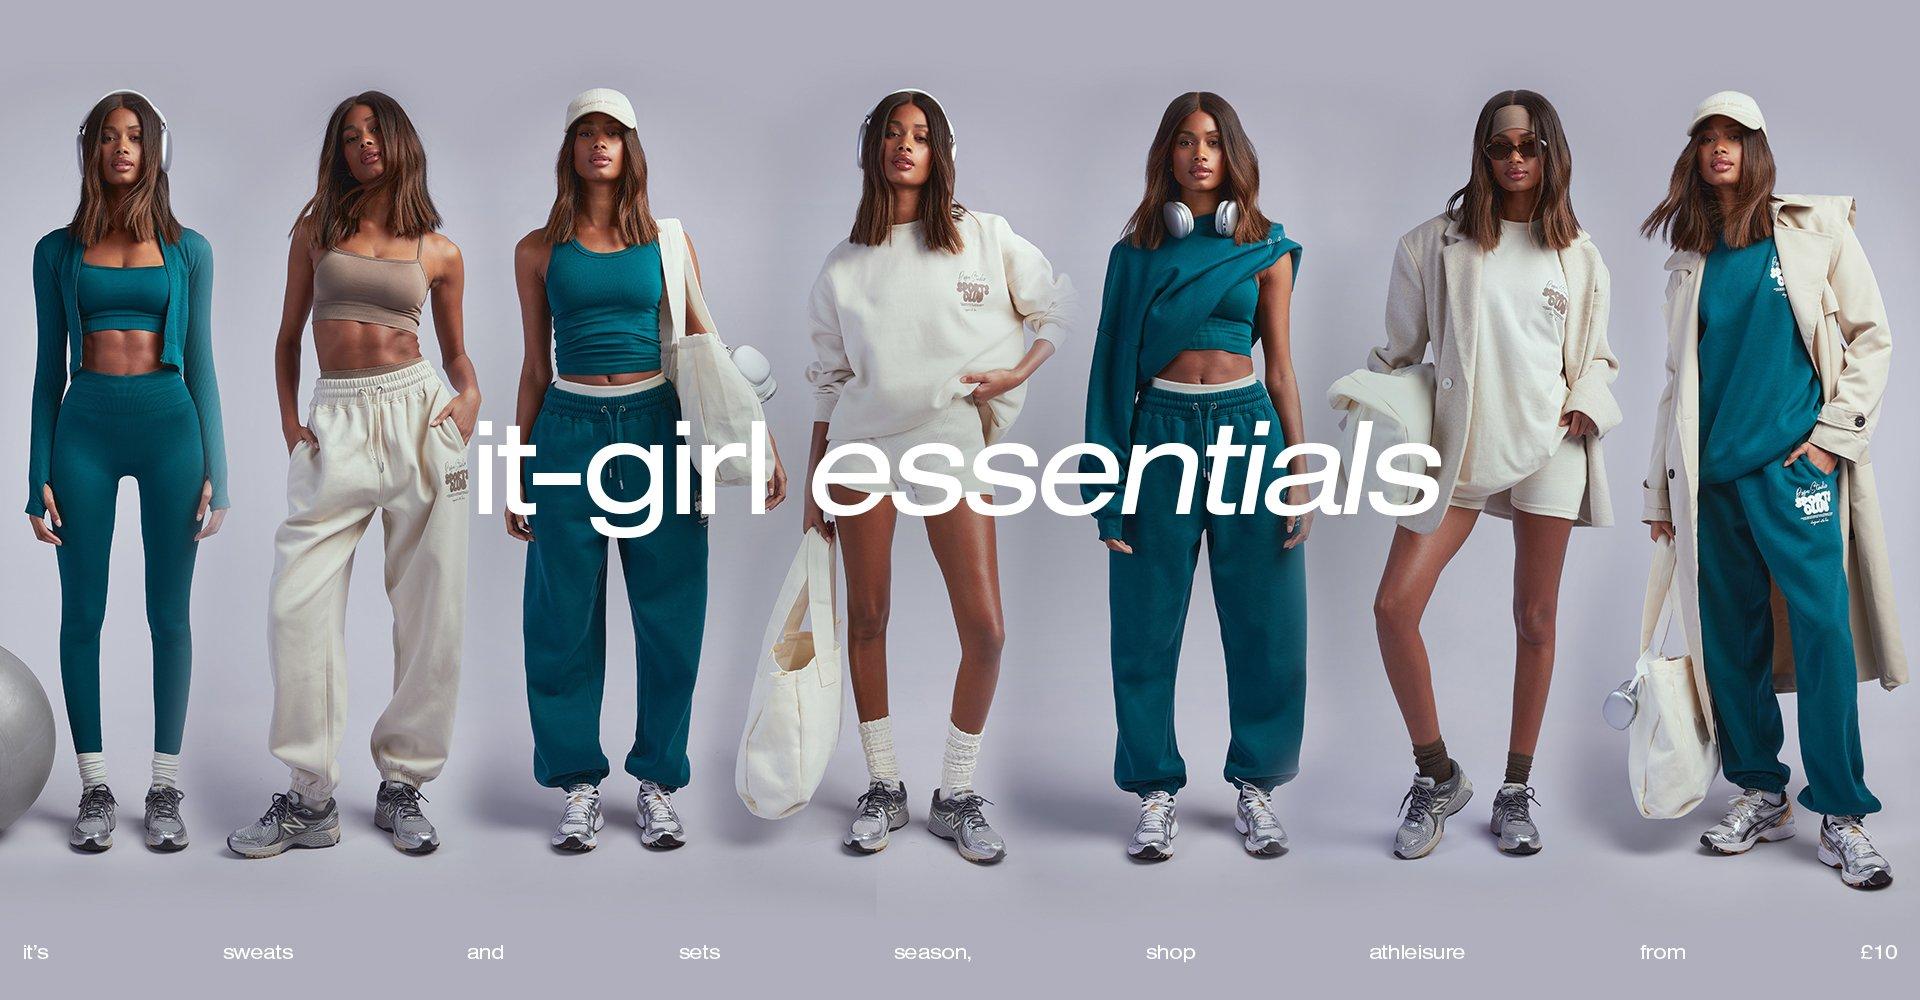 It-girl essentials its sweats and sets season, shop athleisure from £10